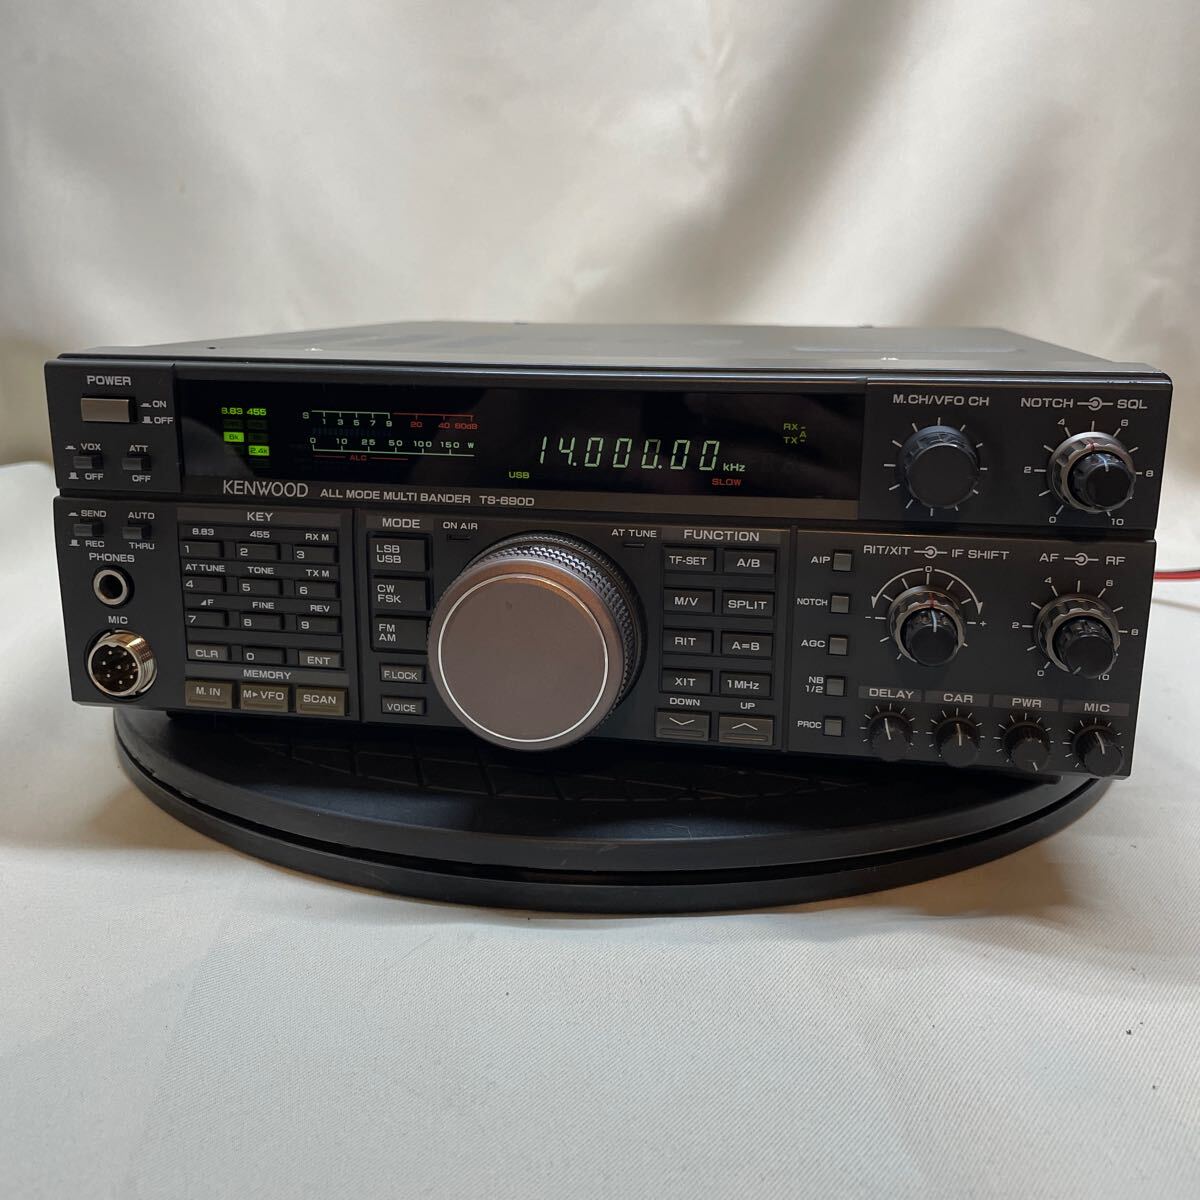 [ working properly goods ]KENWOOD transceiver TS-690D maintenance * cleaning being completed goods beautiful goods operation guarantee 